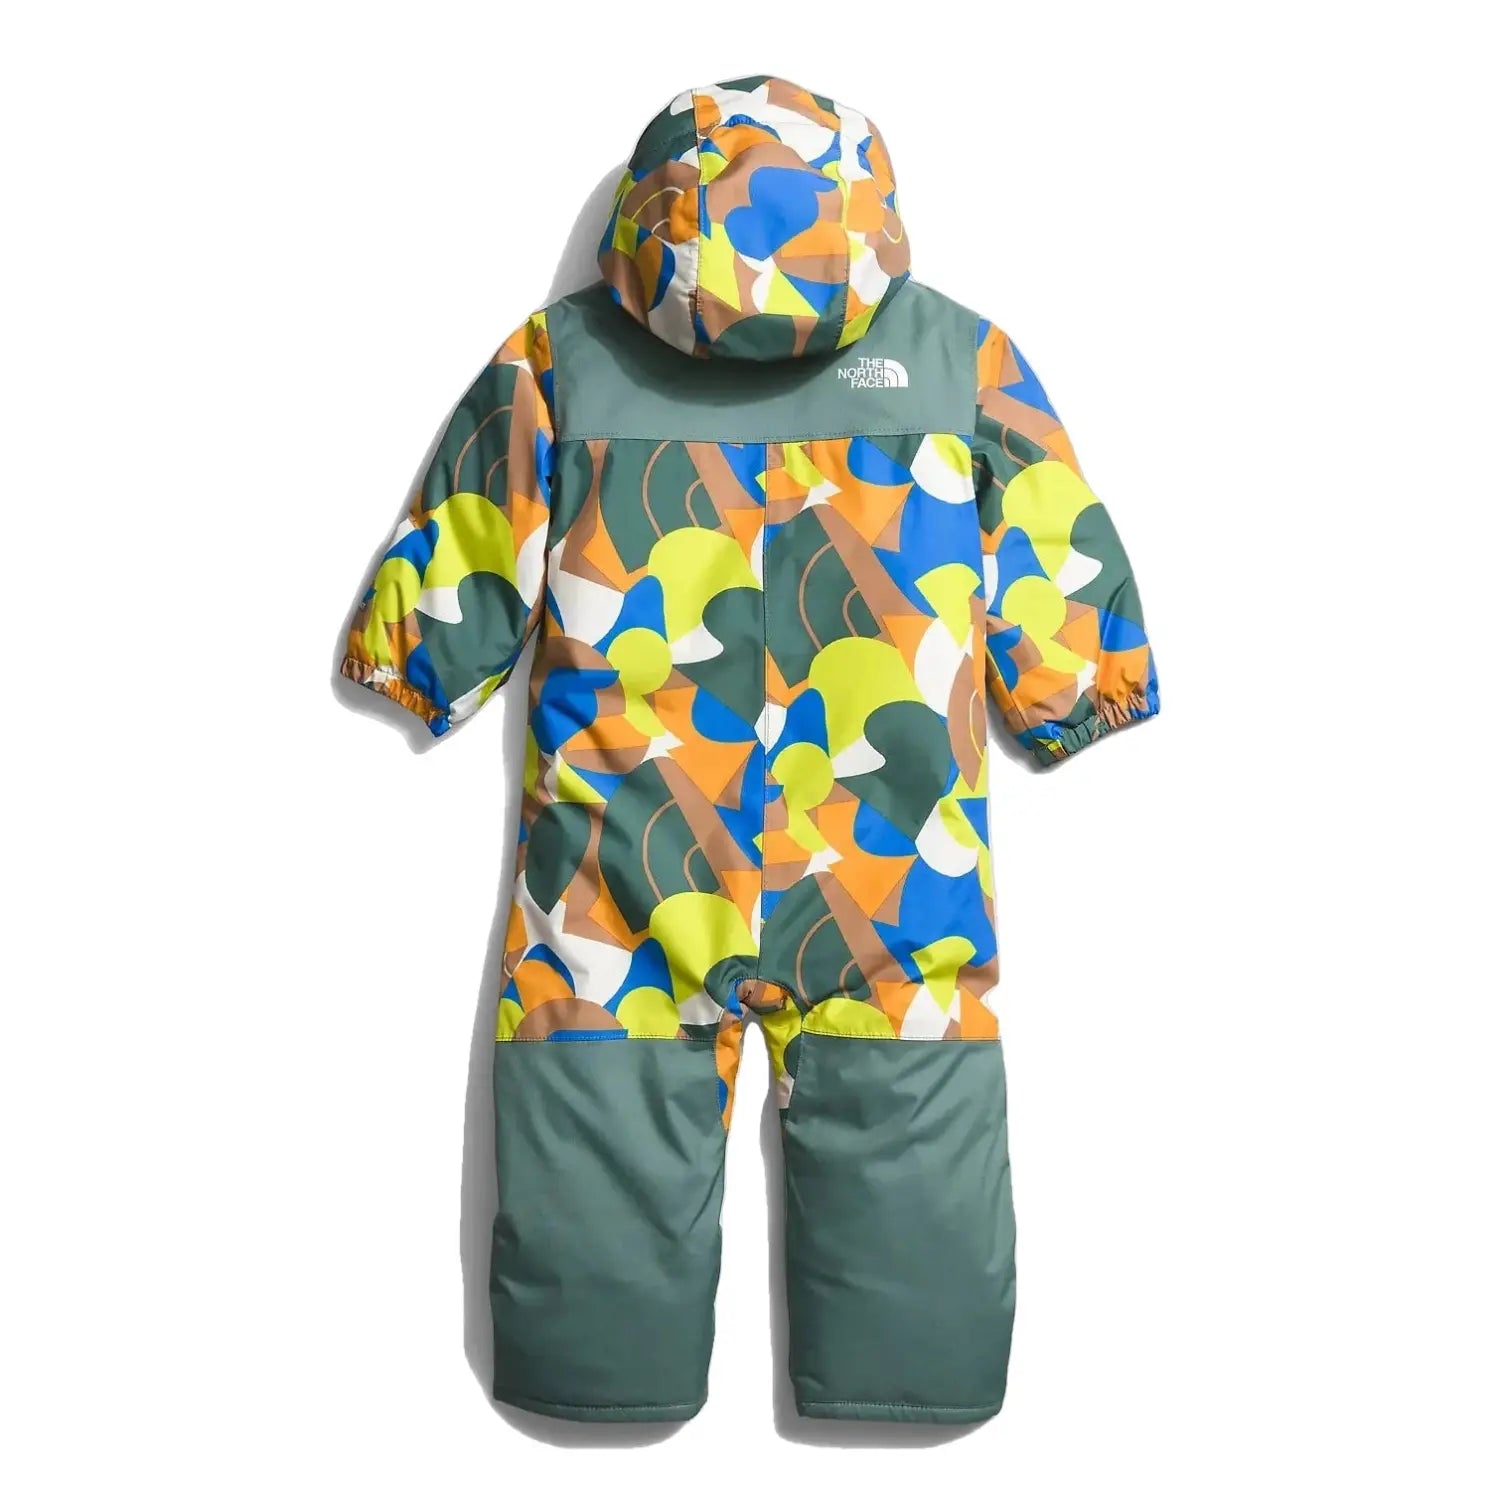 The North Face Baby Freedom Snowsuit shown in Almond Butter Big Abstract Print. Back view.